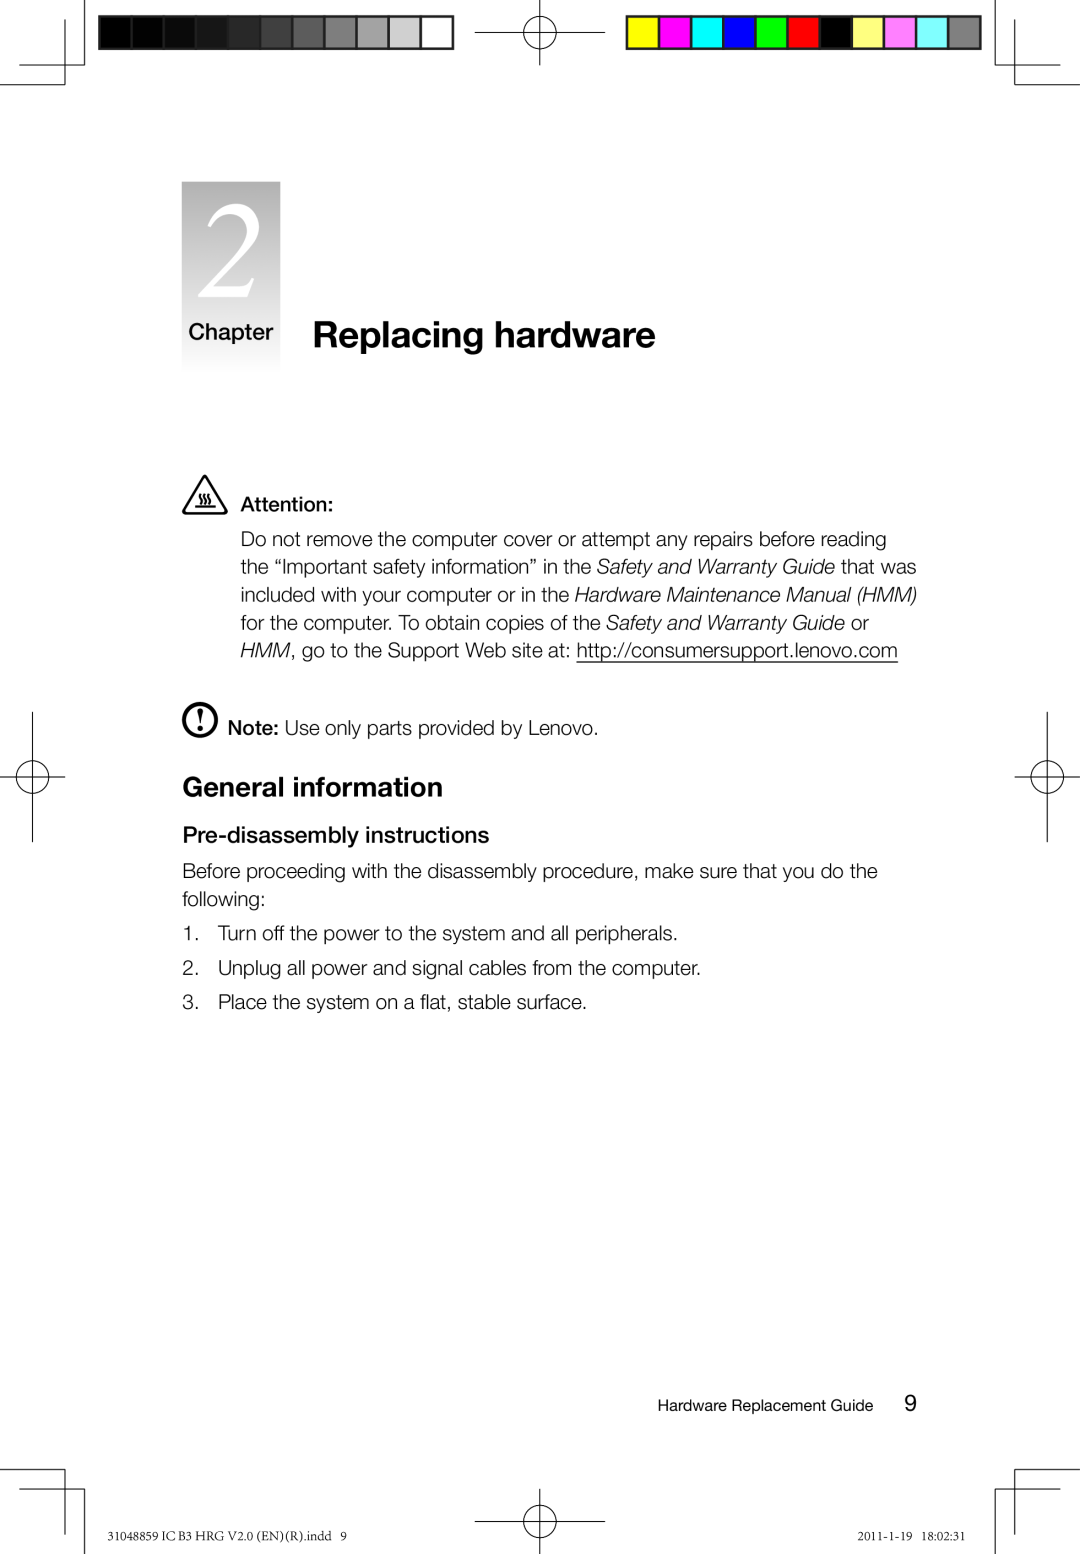 Lenovo B3 manual Chapter Replacing hardware, General information, Pre-disassembly instructions 